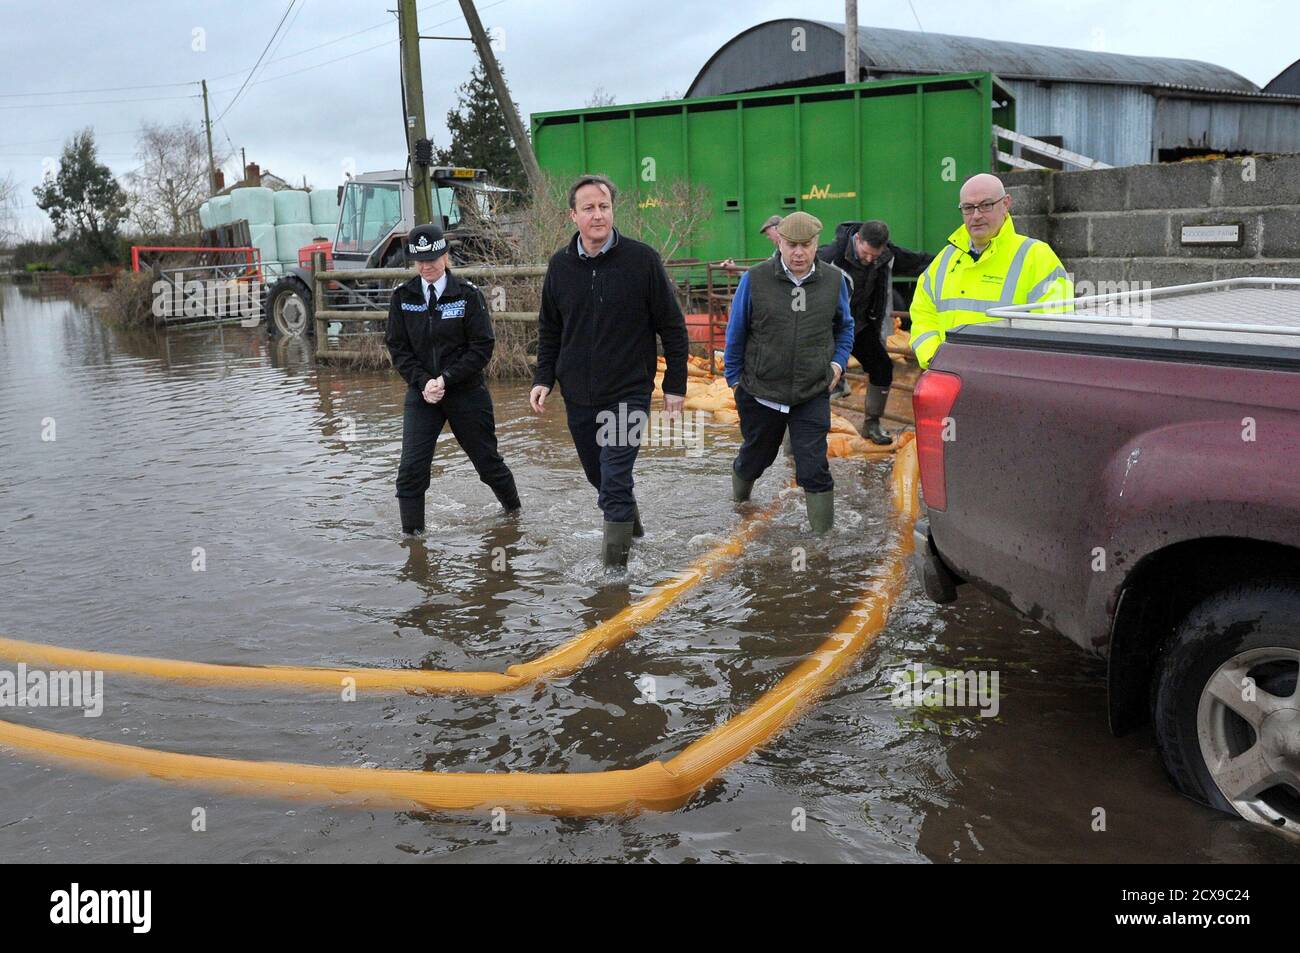 Britain's Prime Minister David Cameron (2nd L) with Bridgwater and West Somerset  MP Ian Liddell-Grainger (3rd L) during a visit to flood affected areas at Goodings Farm in Fordgate, Somerset February 7, 2014.   REUTERS/Tim Ireland/Pool (BRITAIN - Tags: ENVIRONMENT DISASTER POLITICS) Foto Stock